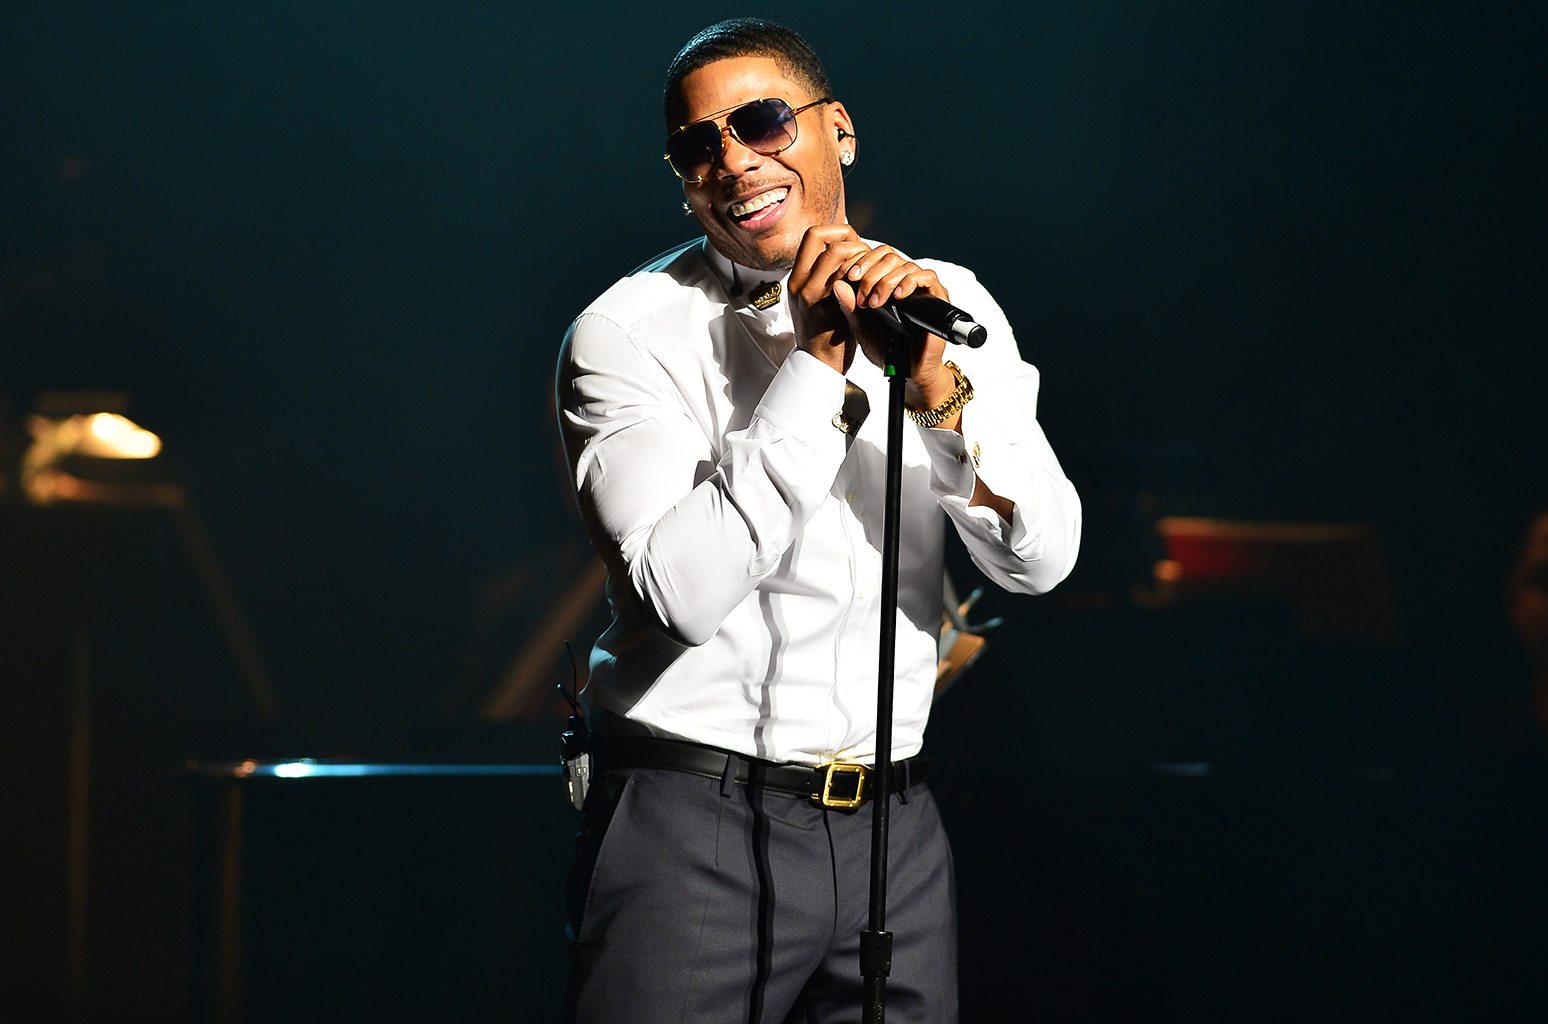 Nelly Arrested for Rape!?